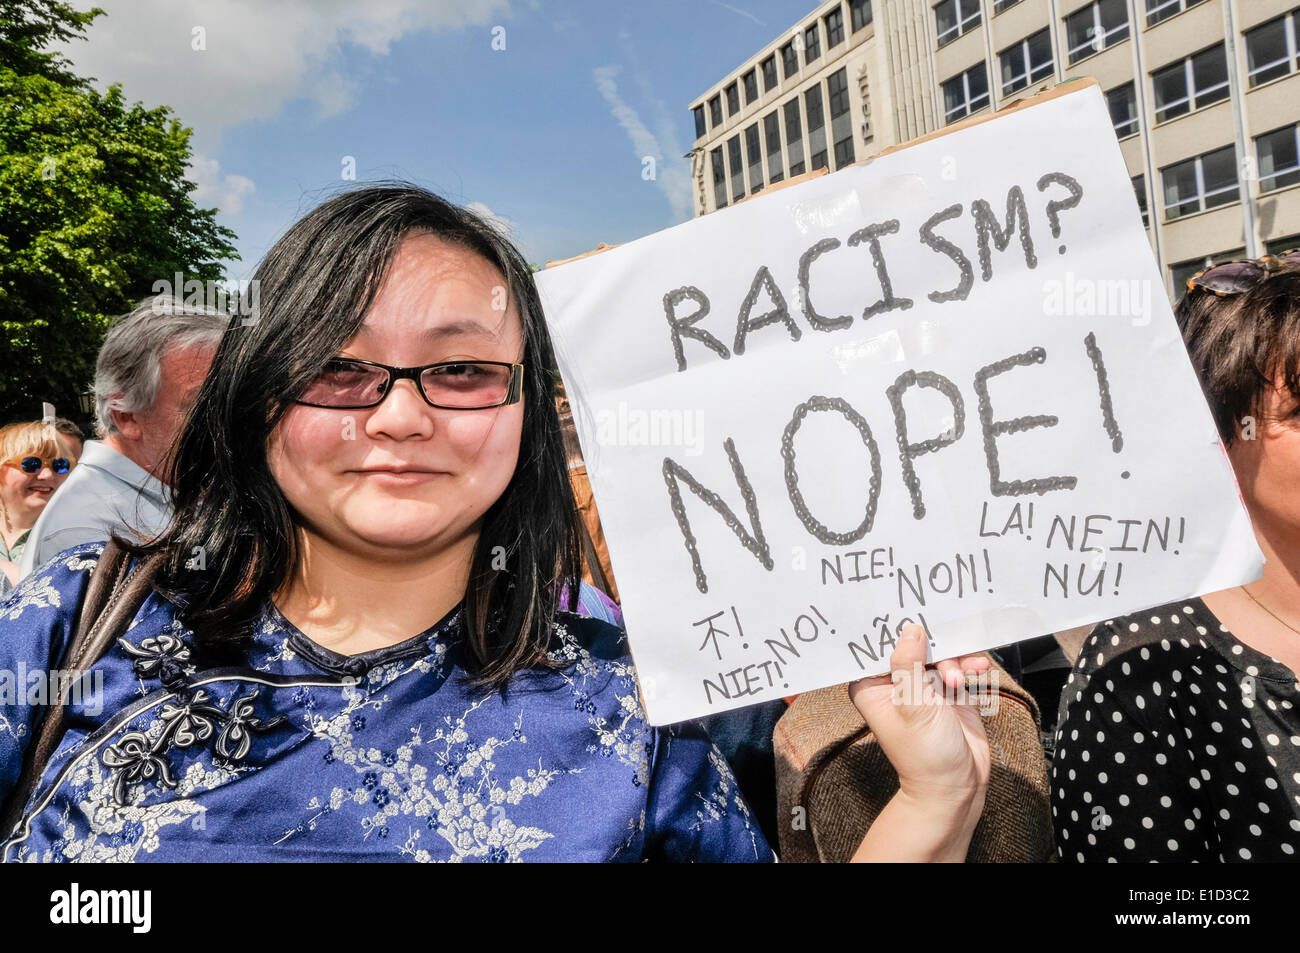 Belfast, Northern Ireland. 31 May 2014 - A woman holds a sign saying 'Racism? Nope!'. Thousands of people turn out for an anti-racism rally held in support of Anna Lo MLA.  Ms Lo had threatened to leave Northern Ireland because of the amount of racist attacks. Credit:  Stephen Barnes/Alamy Live News Stock Photo